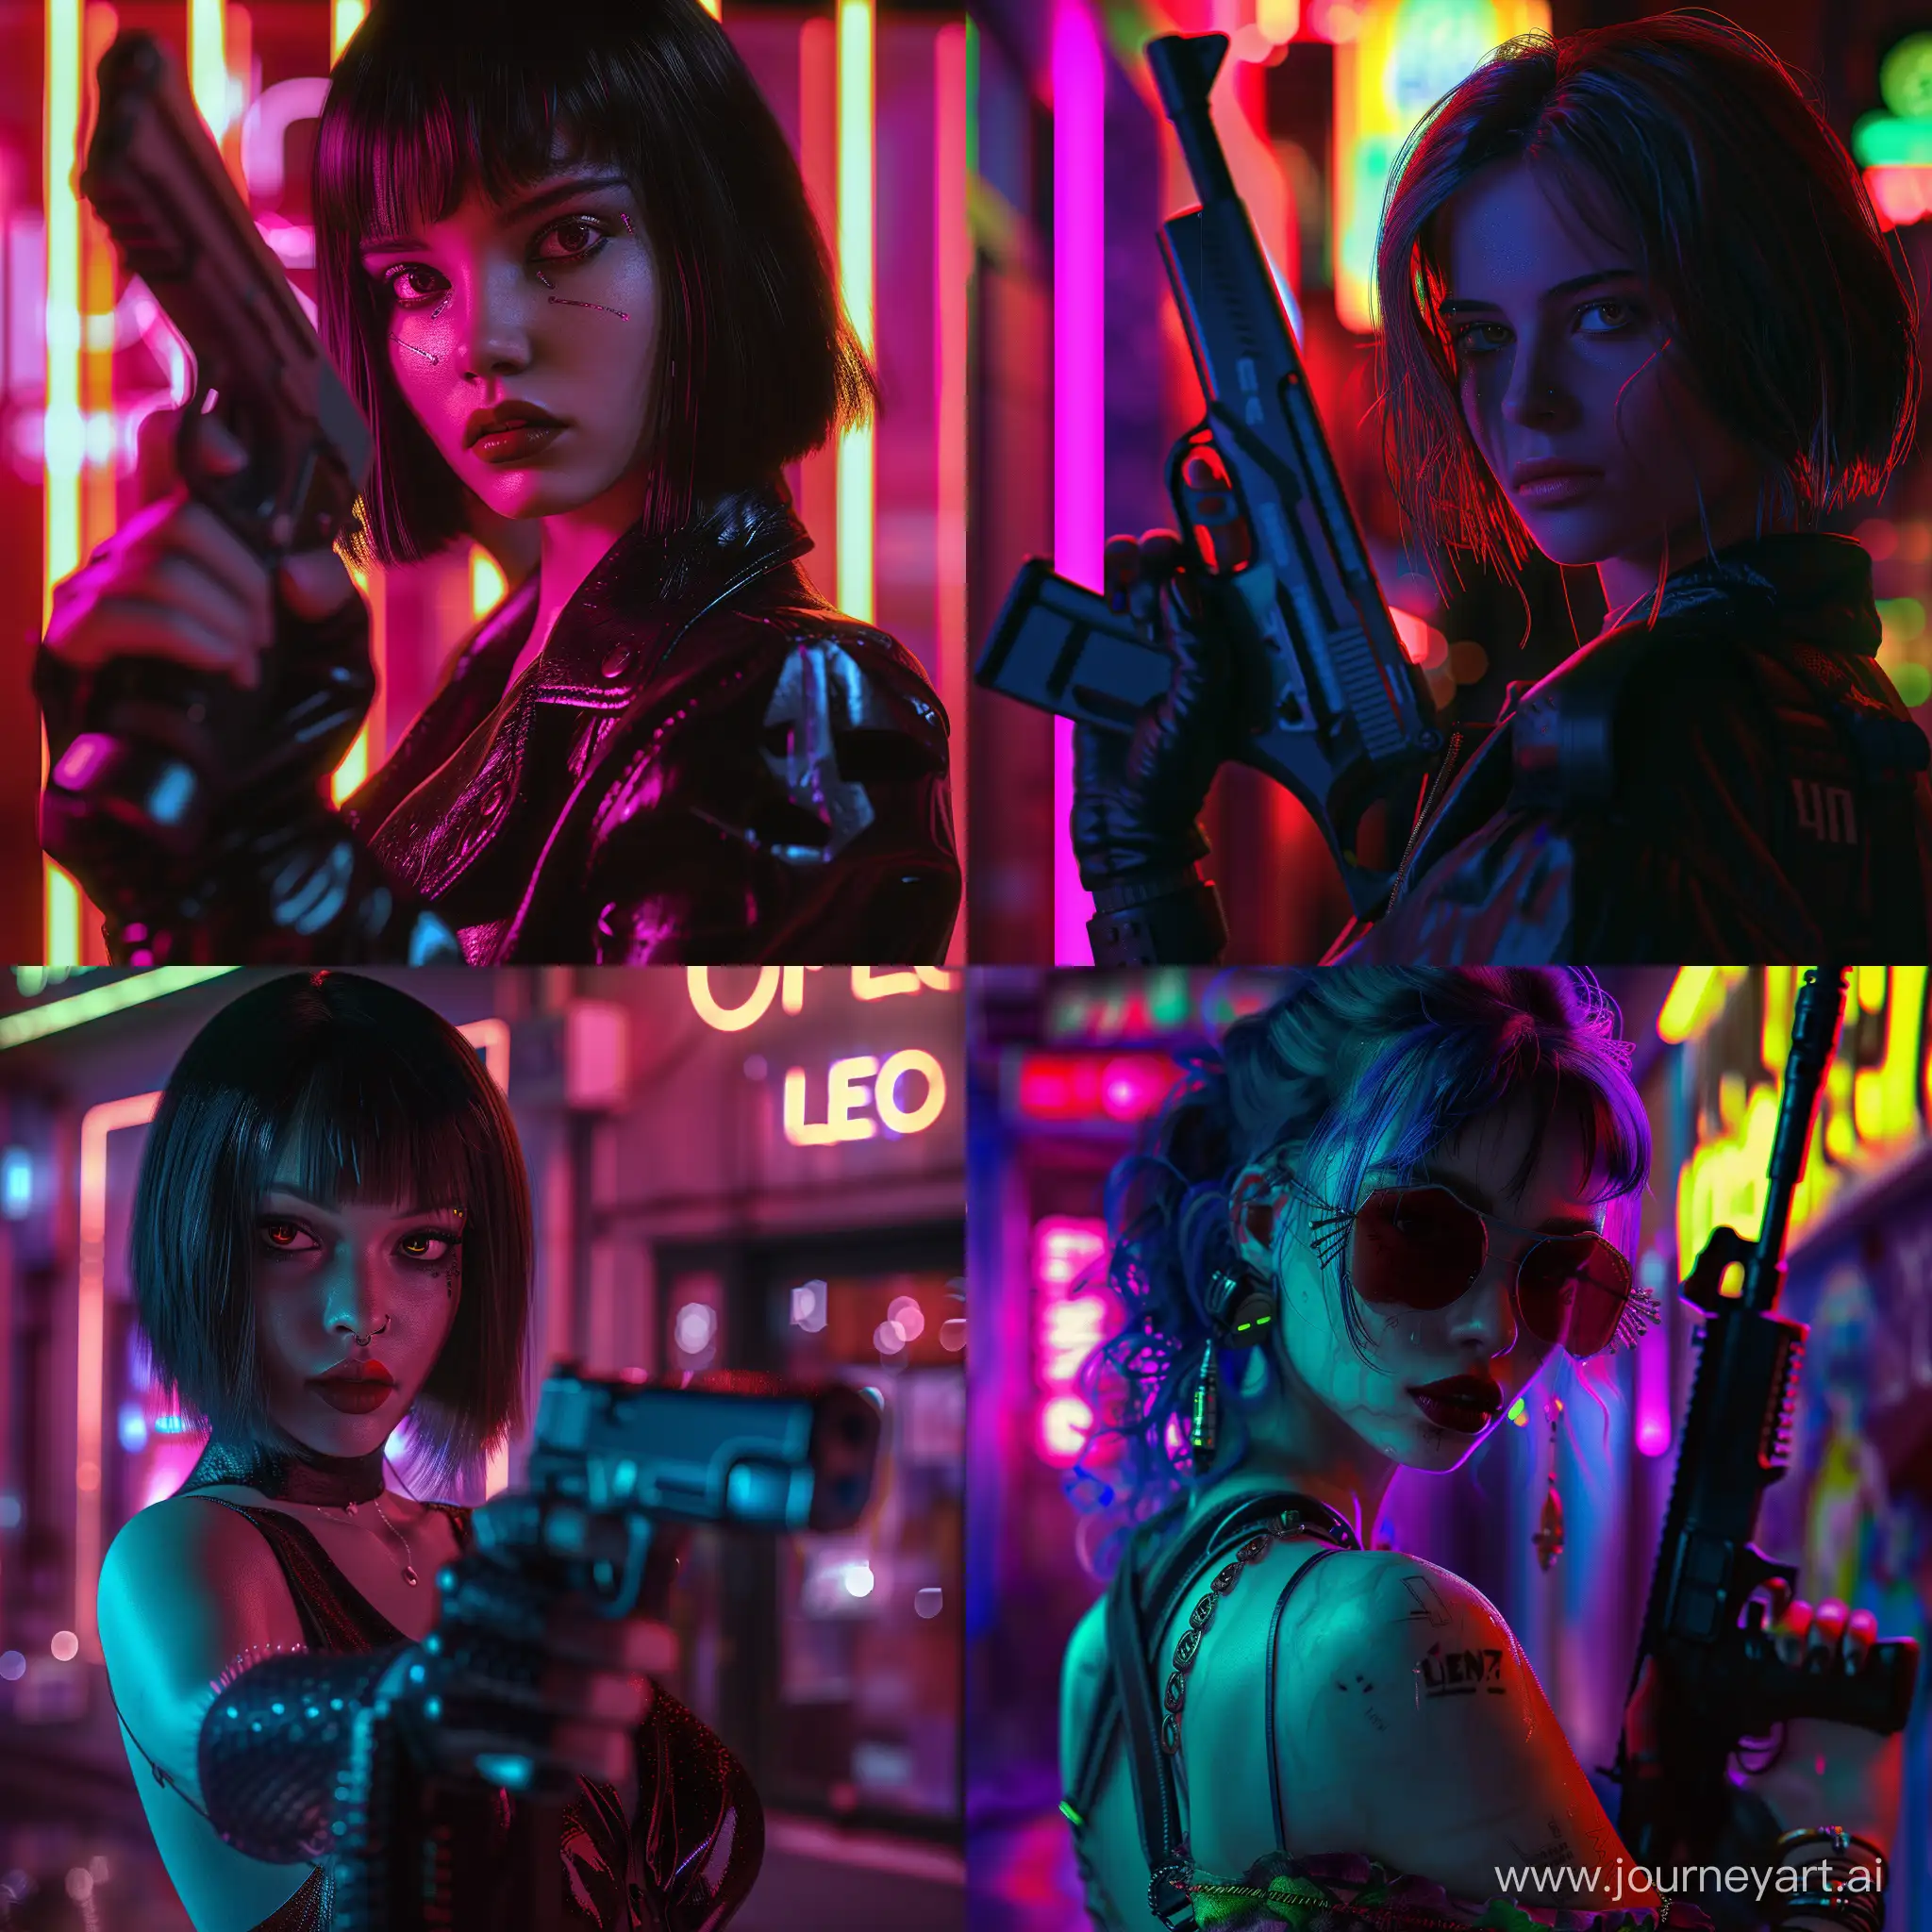 Matilda-Cyberpunk-Fan-Art-Leons-Iconic-Character-in-Detailed-4K-with-Neon-Lighting-and-Gun